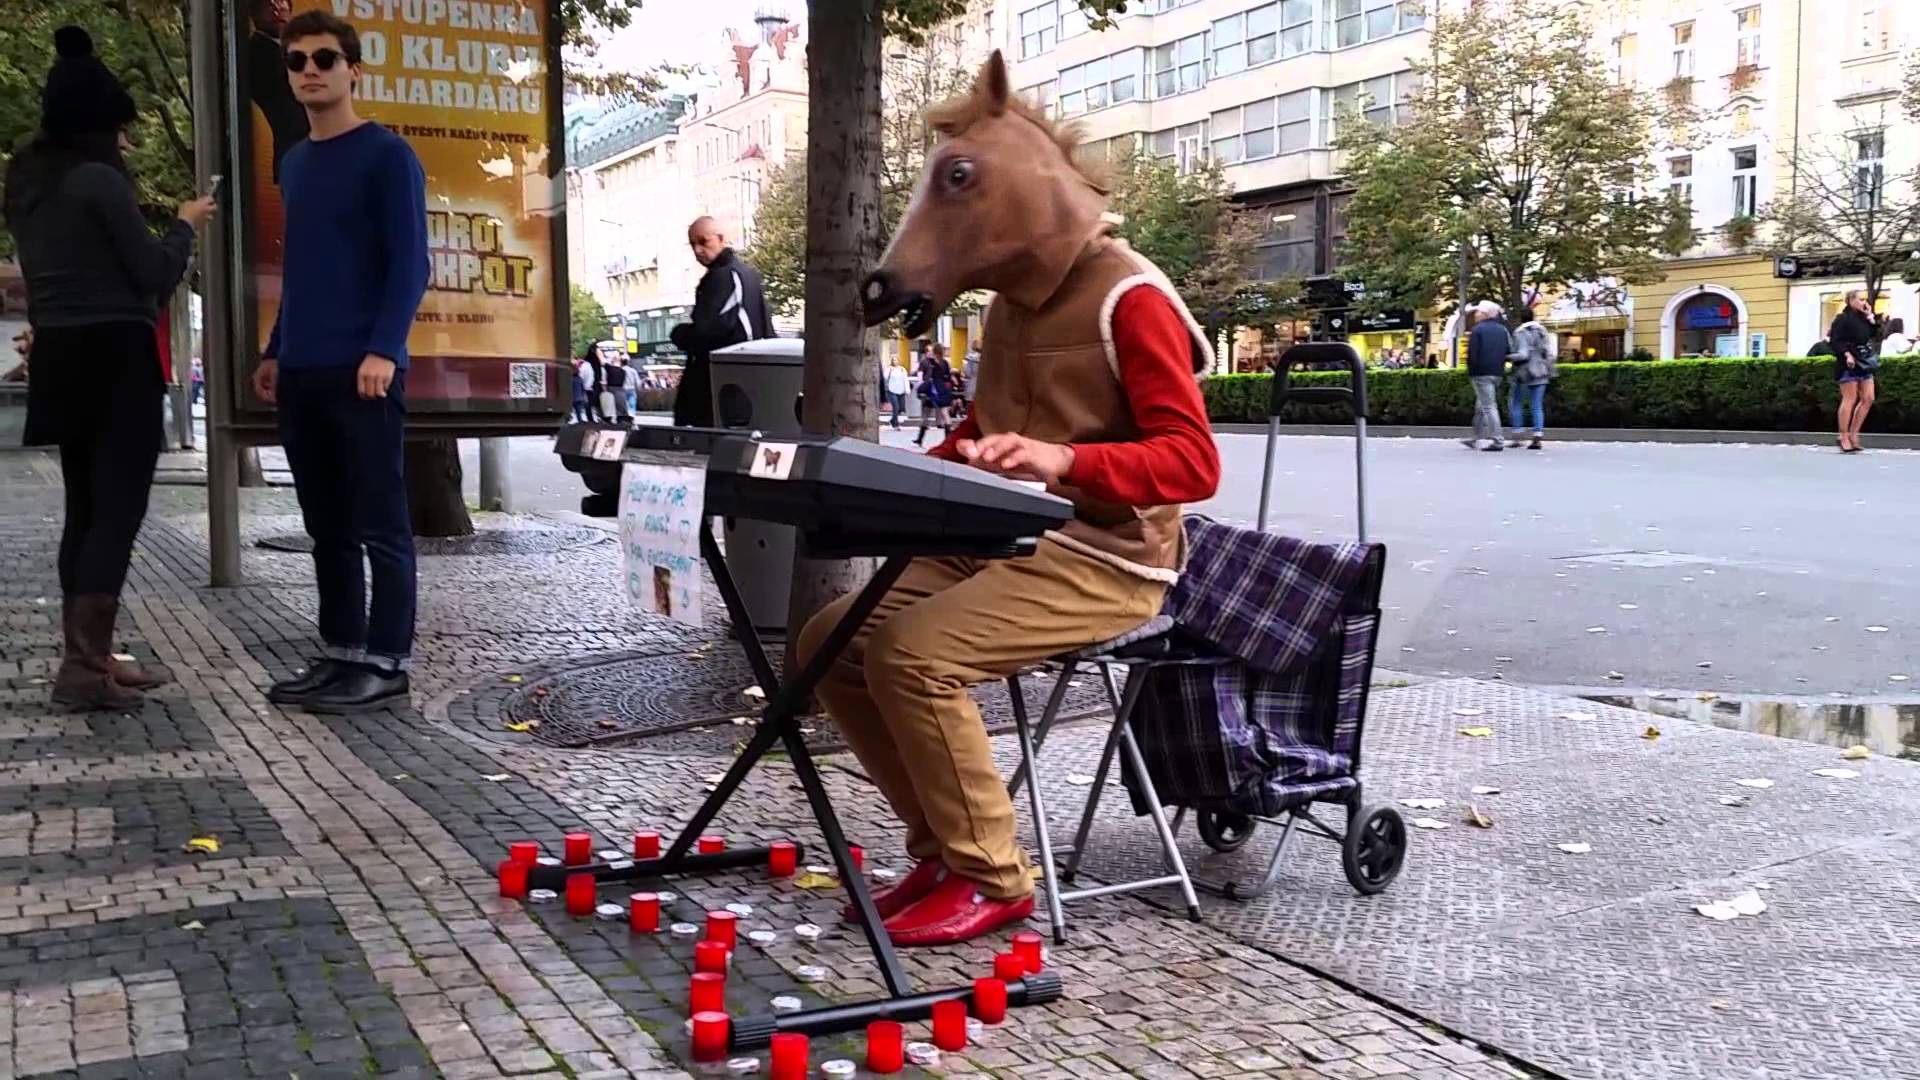 super cool playing horse street musician! - YouTube